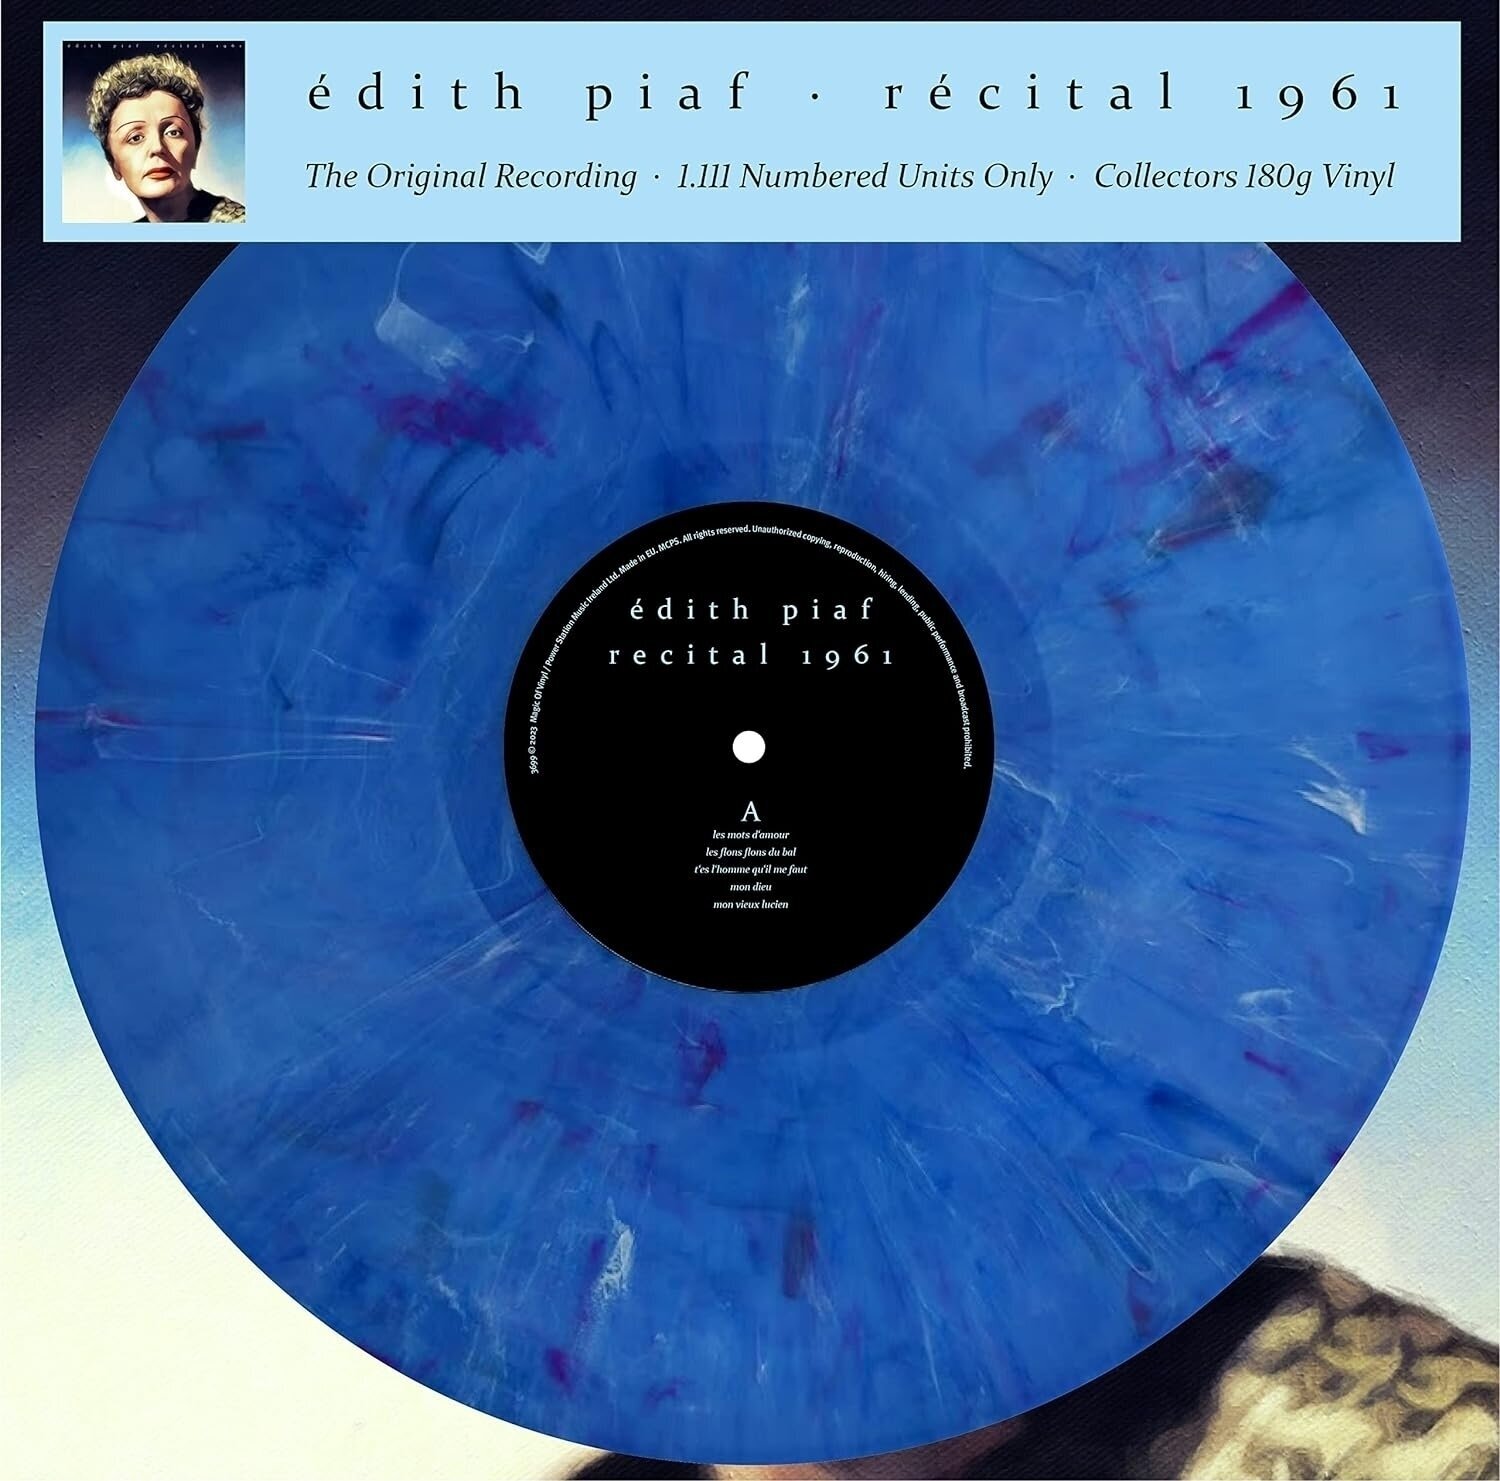 Disque vinyle Edith Piaf - Récital 1961 (Limited Edition) (Numbered) (Reissue) (Blue Marbled Coloured) (LP)